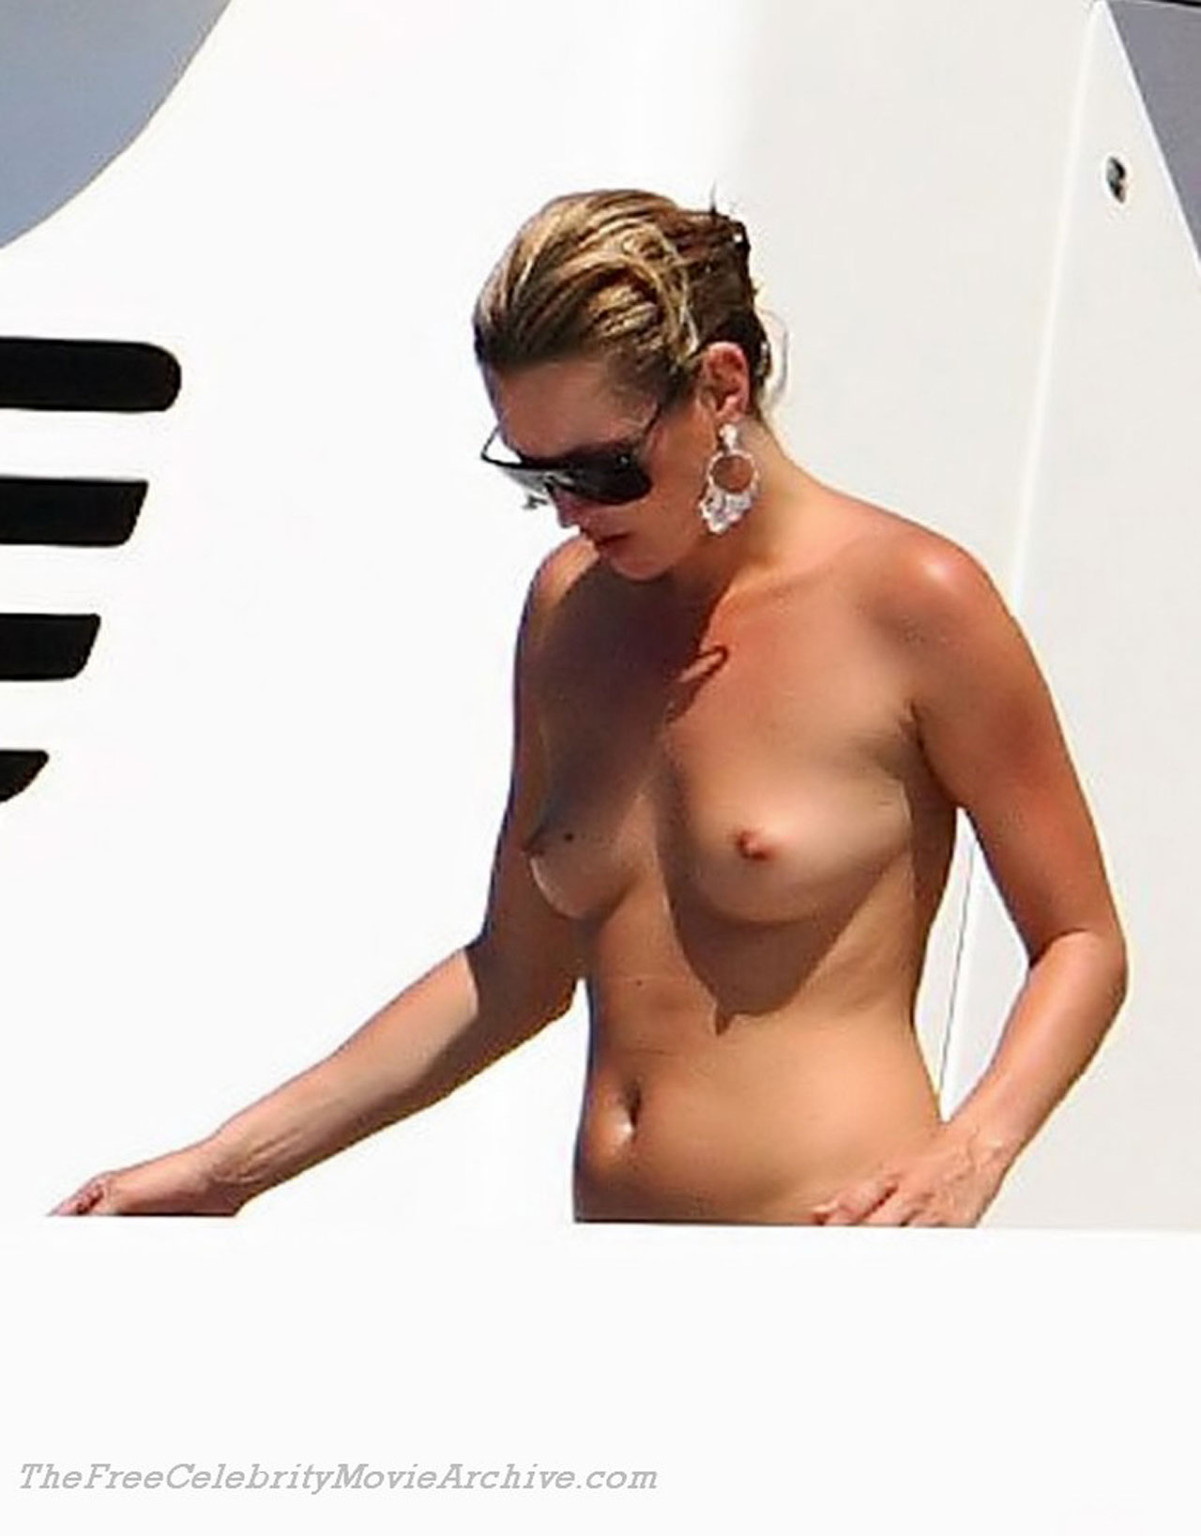 Kate Moss enjoying with her boyfriend on yacht in topless paparazzi photos #75347969